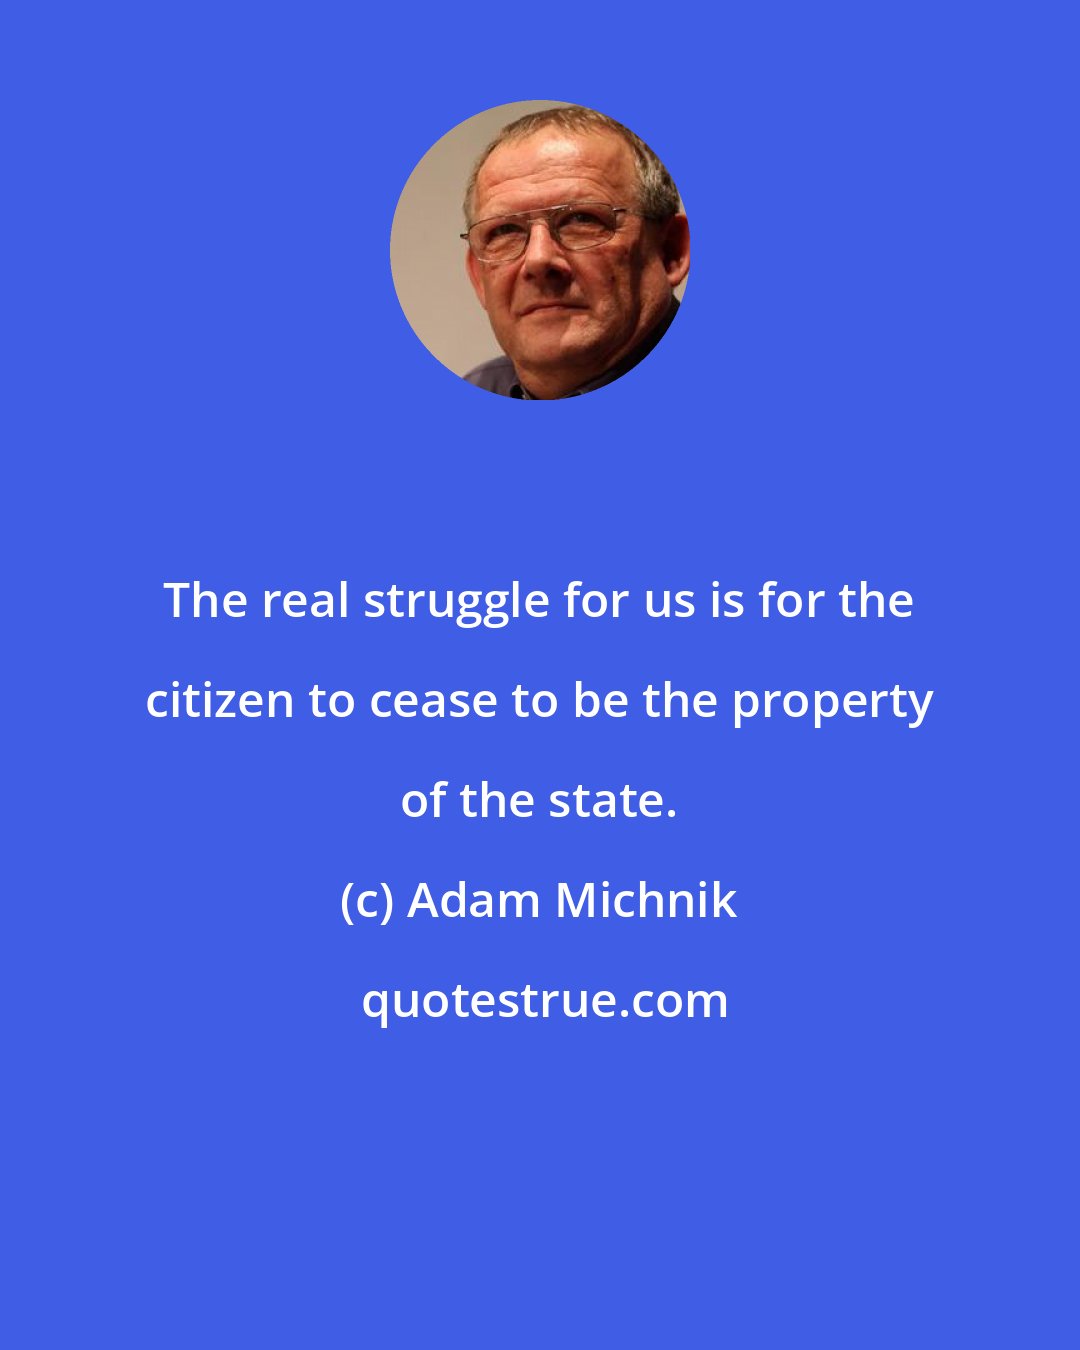 Adam Michnik: The real struggle for us is for the citizen to cease to be the property of the state.